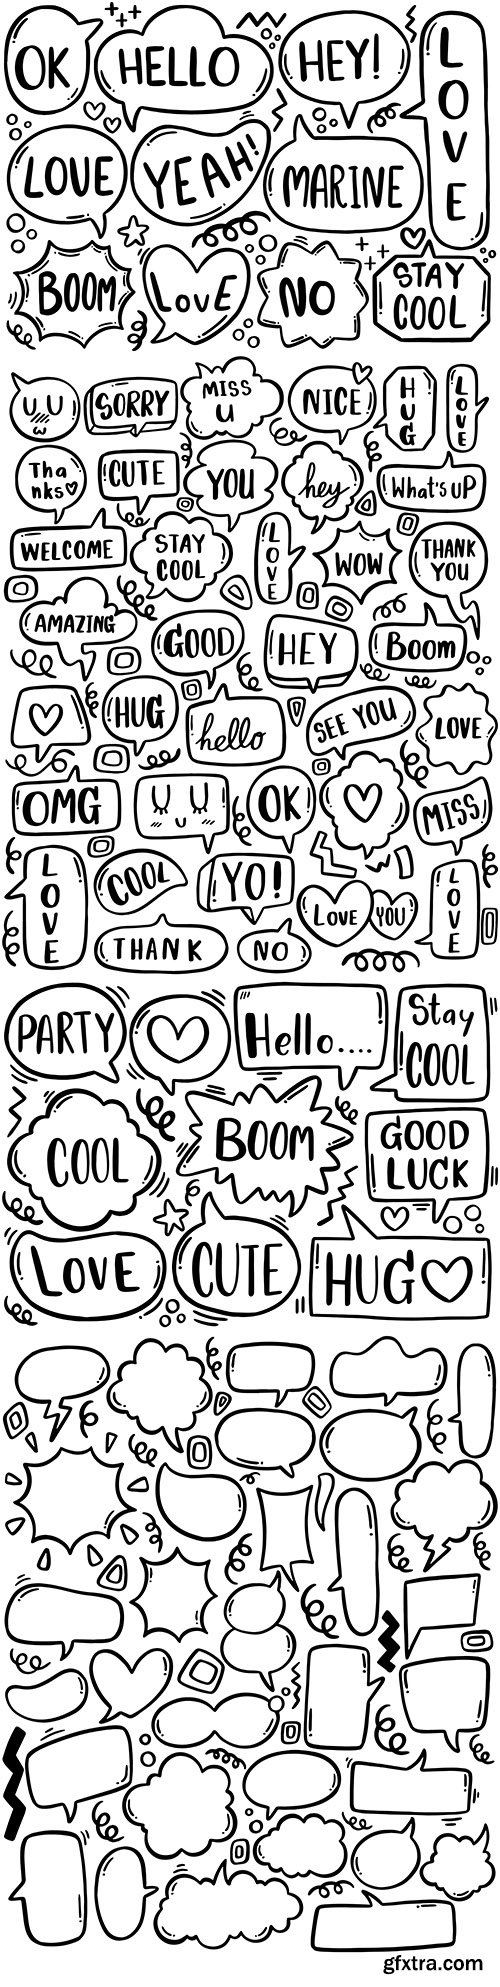 Text with speech in bubble style of caraculi drawn set